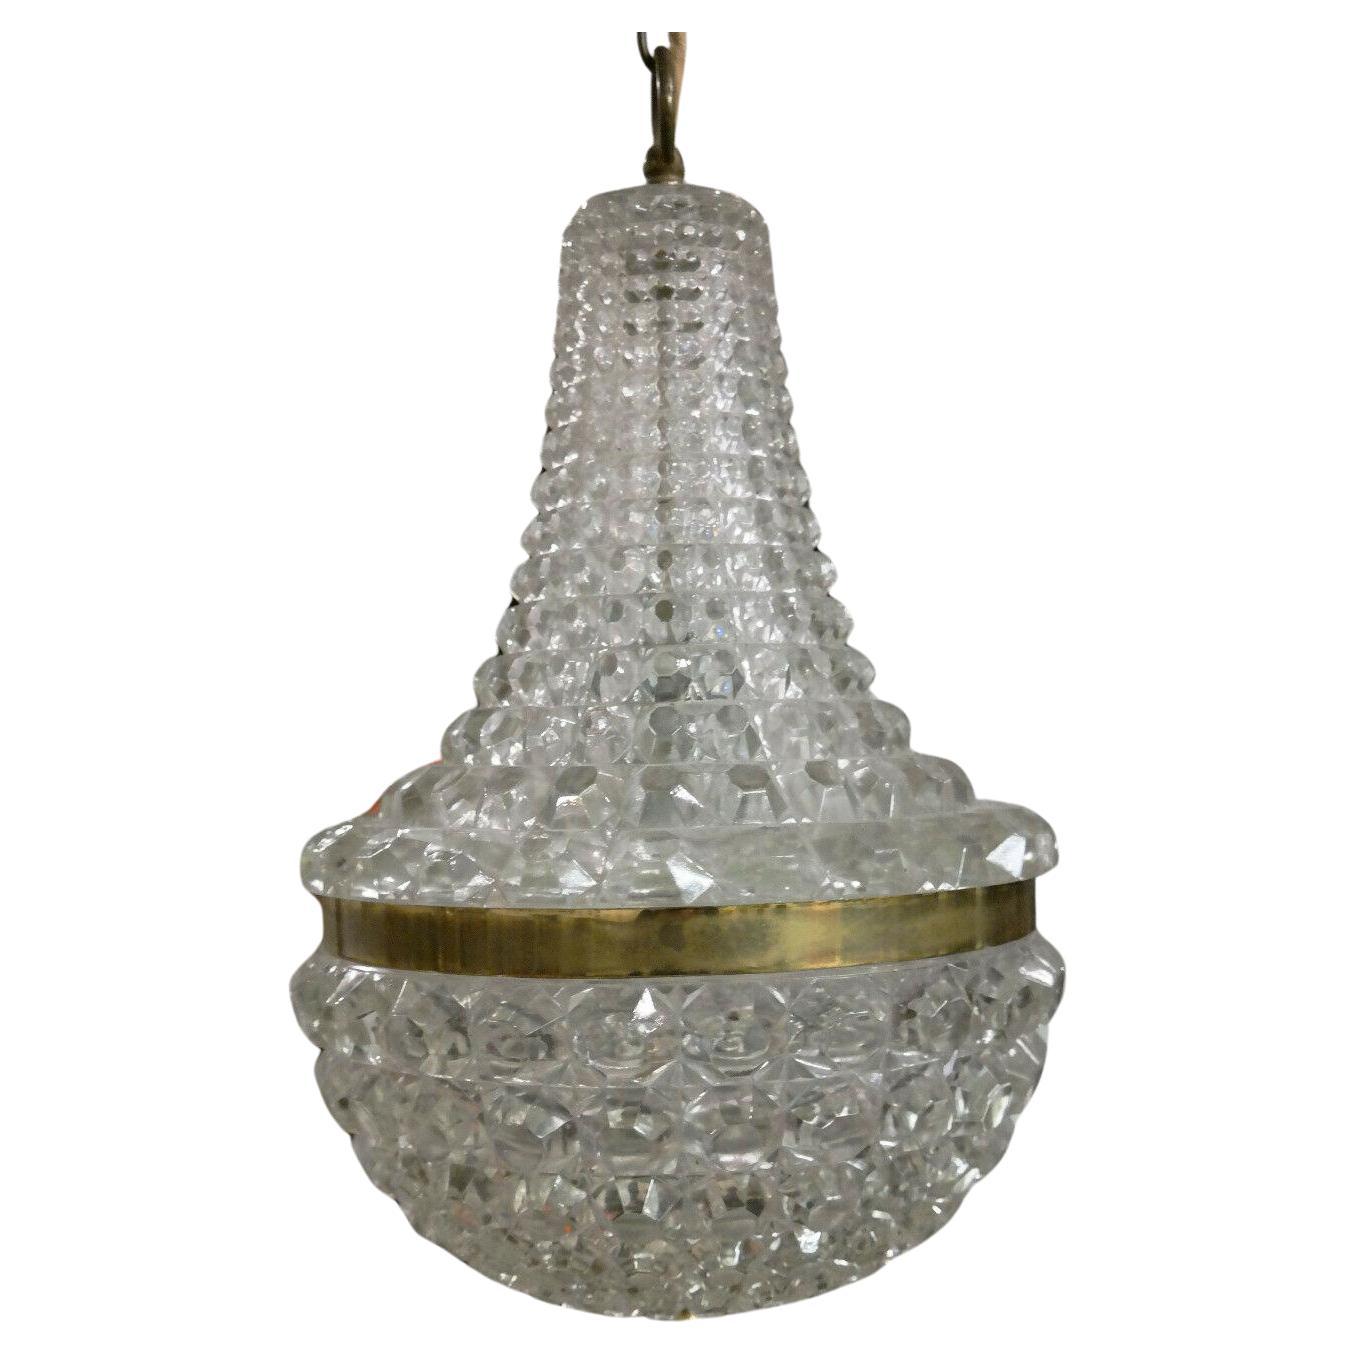 1950's French Mid Century Modern Formed Glass Bag and Tent Chandelier - Baccarat im Angebot